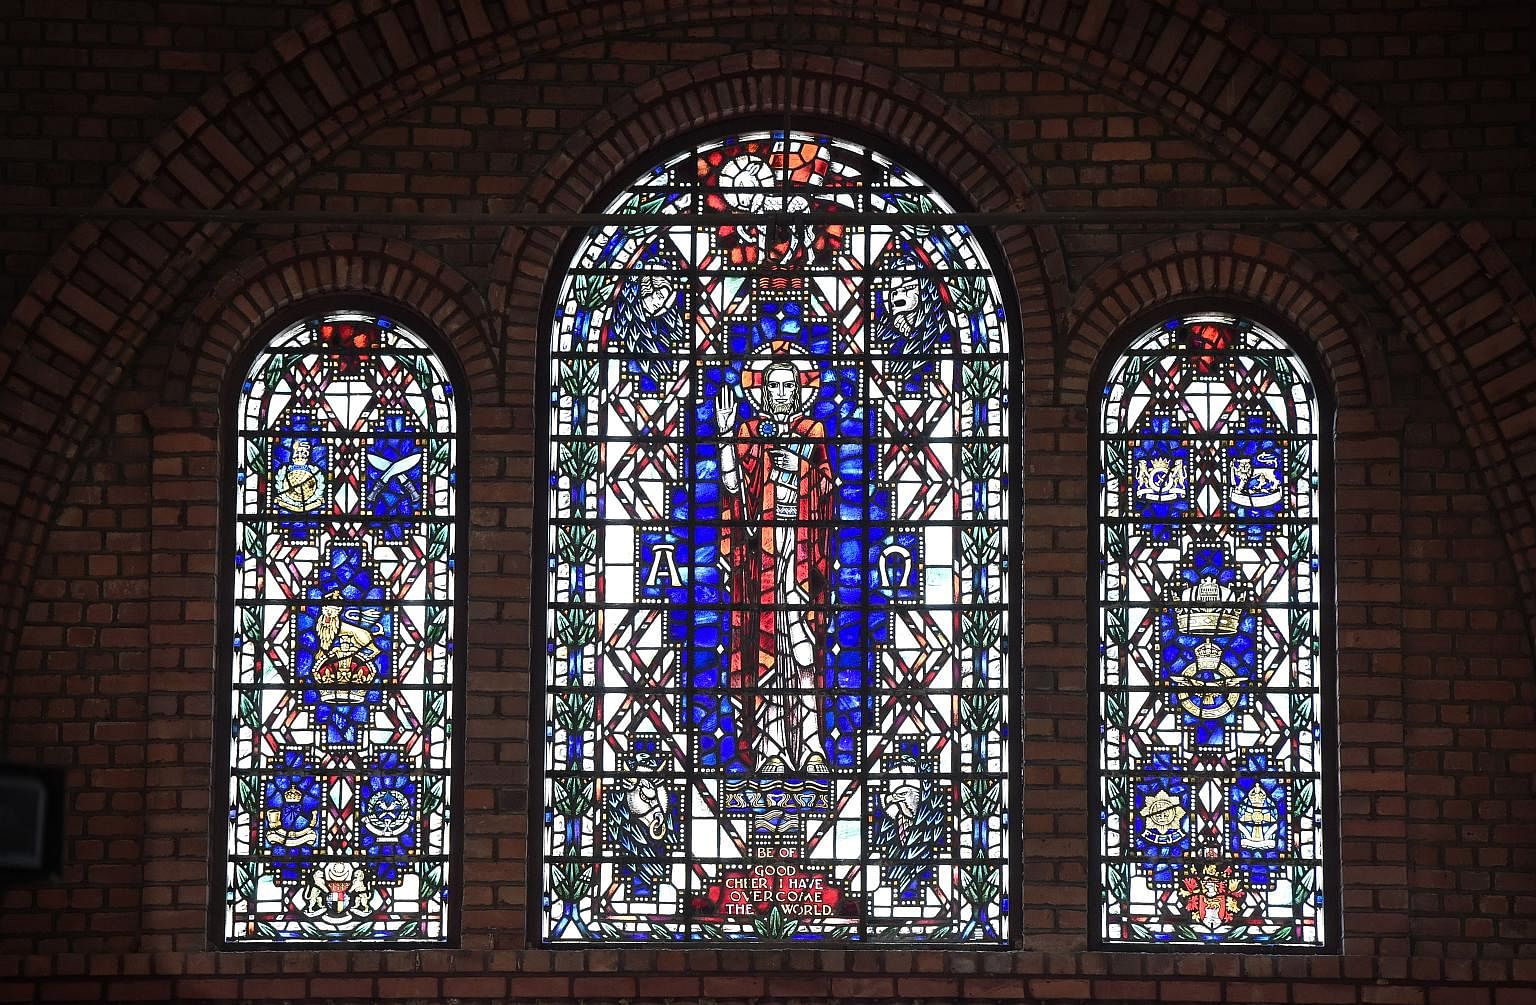 Stained glass windows bearing the image of Christ and the badges of the various regiments and forces that fought for the British in Malaya and Singapore.